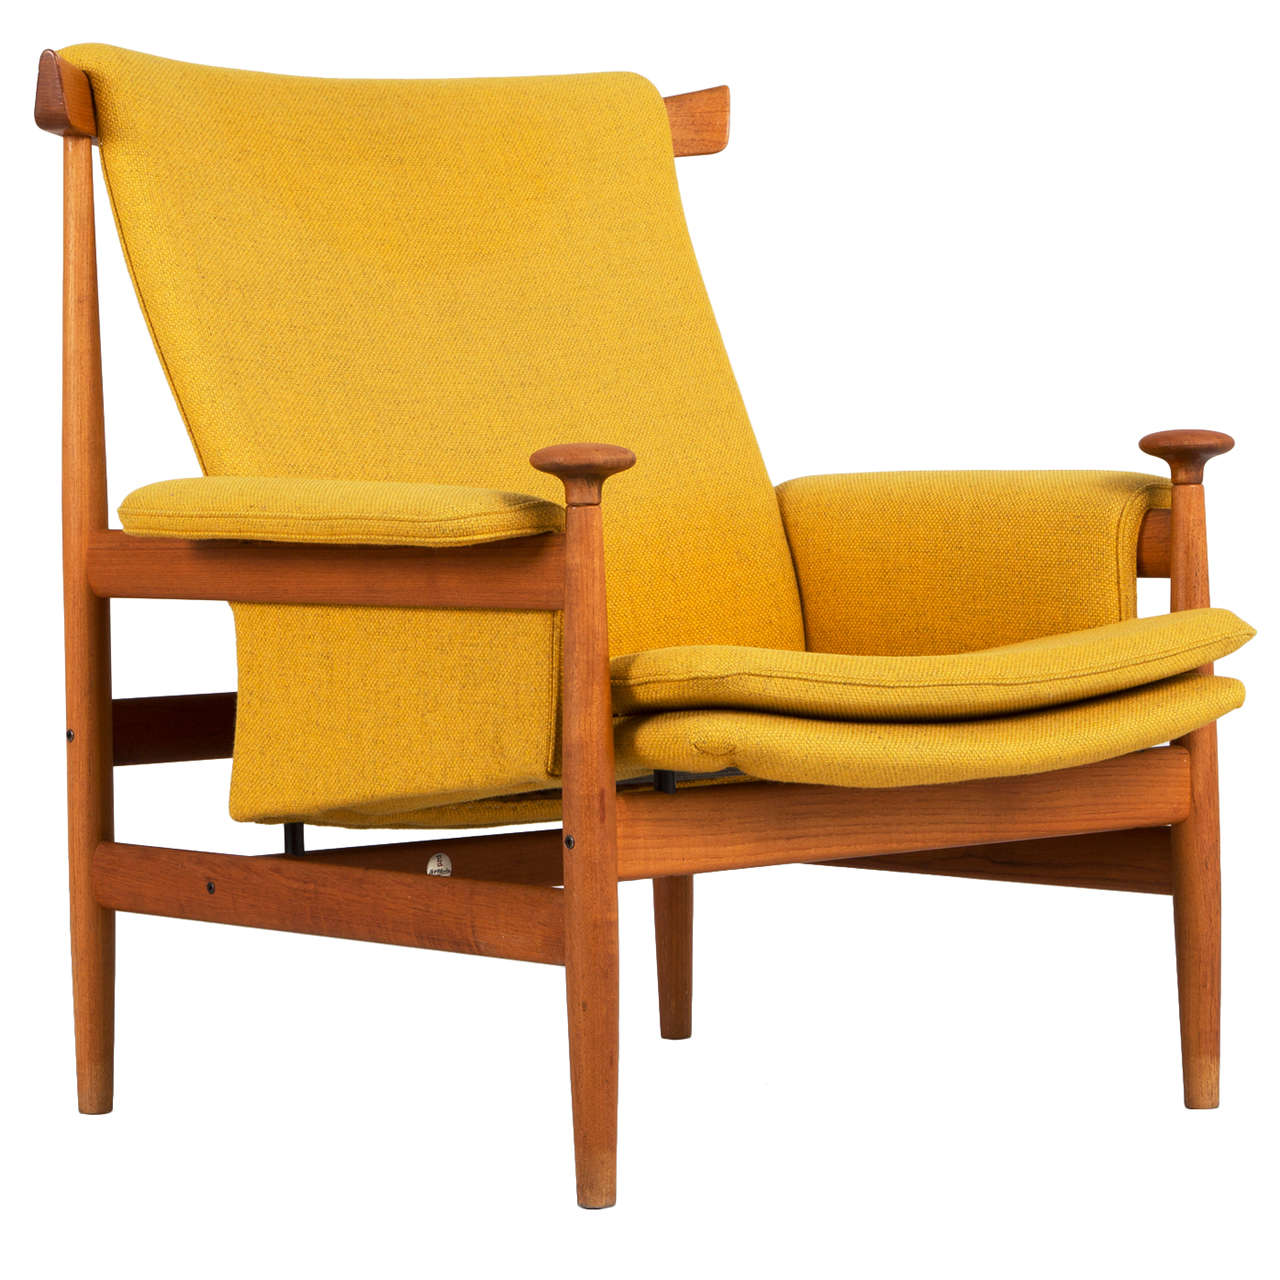 Bwana Chair by Finn Juhl for France and Sons, Denmark at 1stDibs 